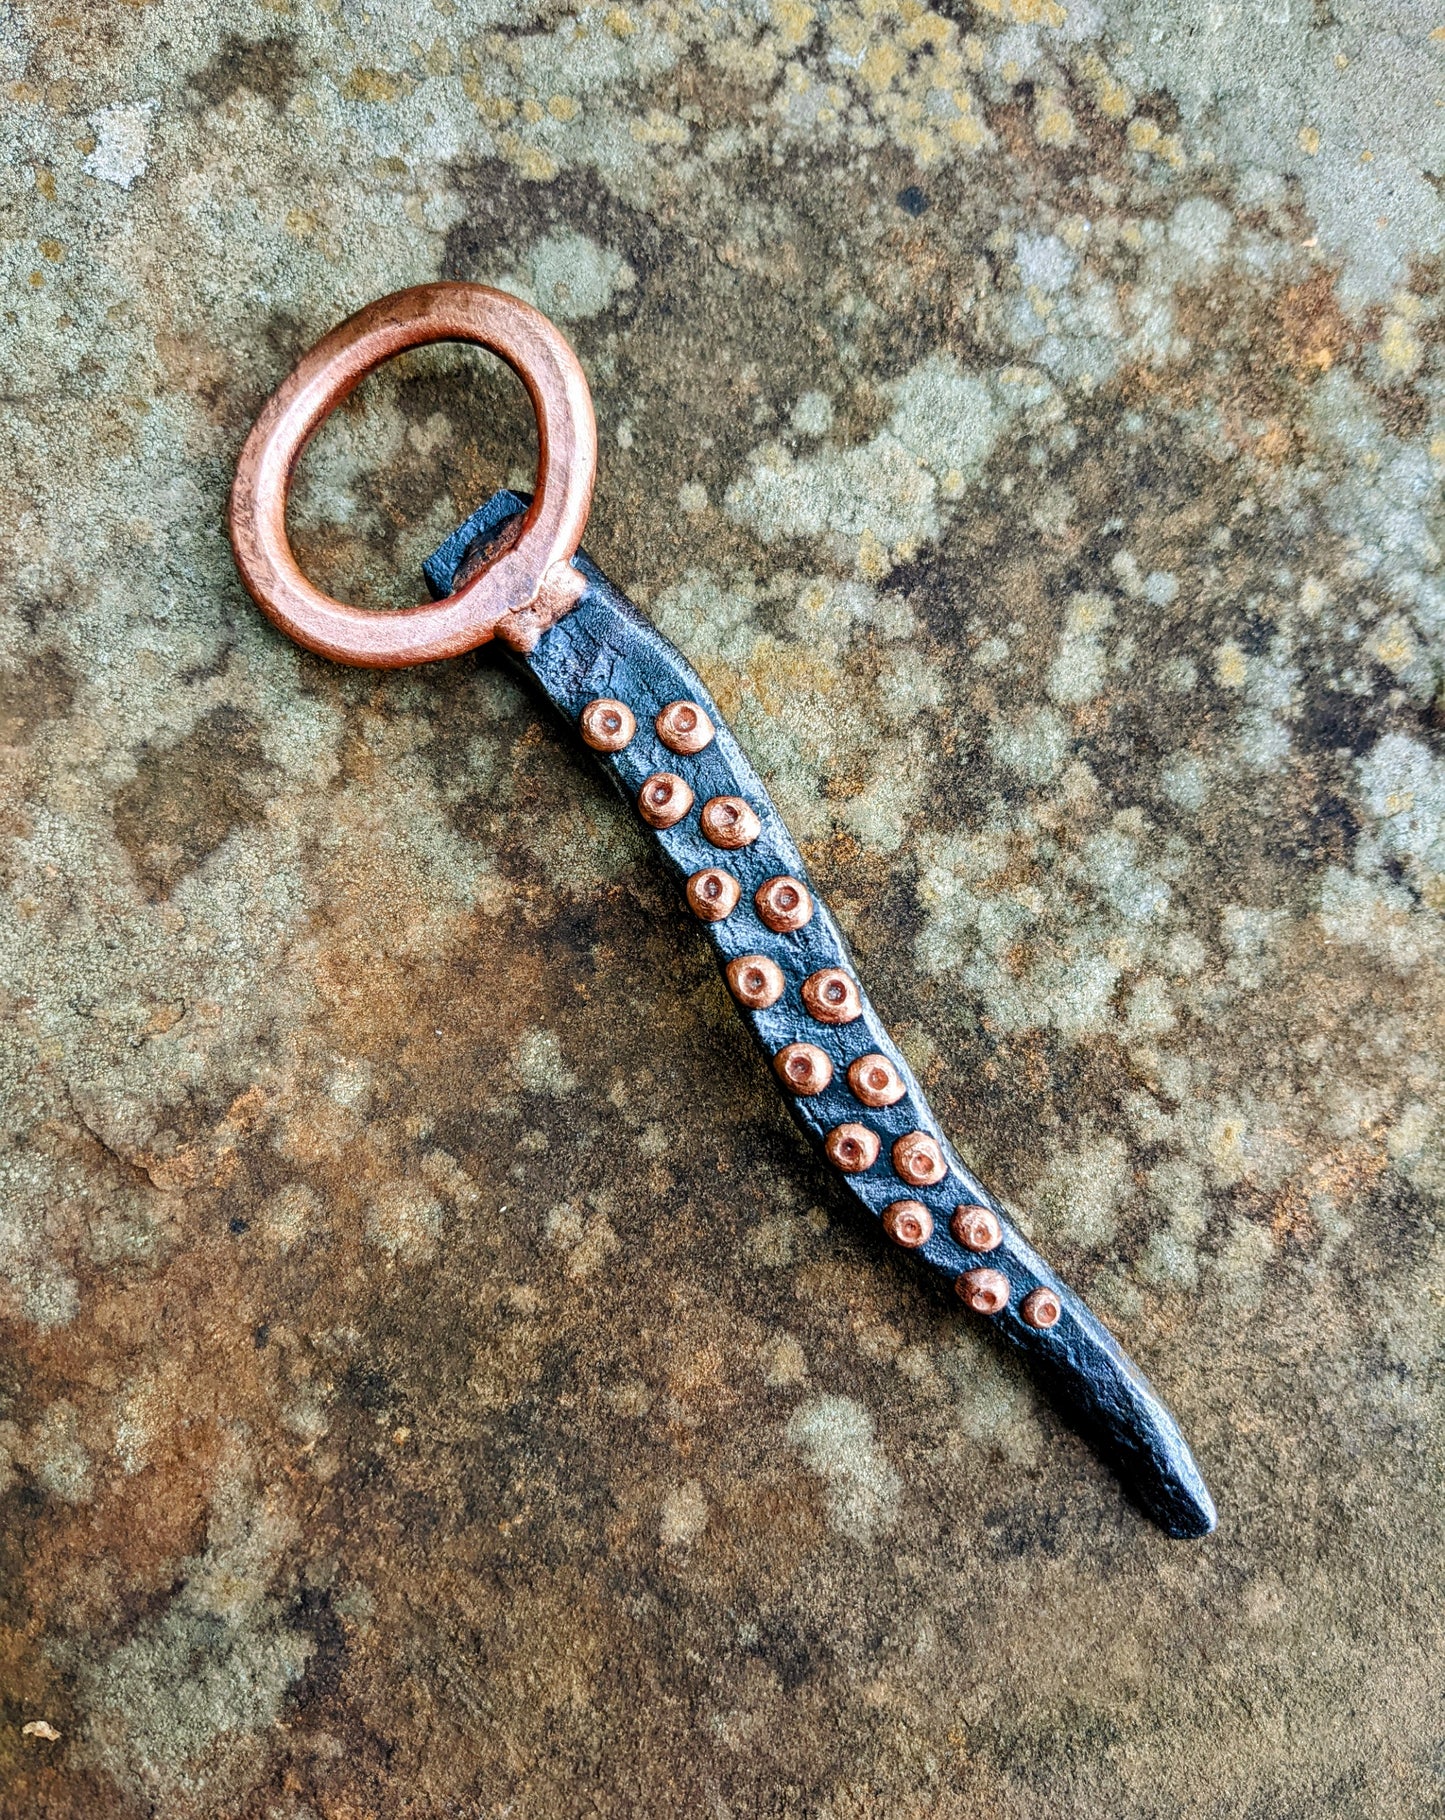 Copper and Iron Tentacle Bottle Opener